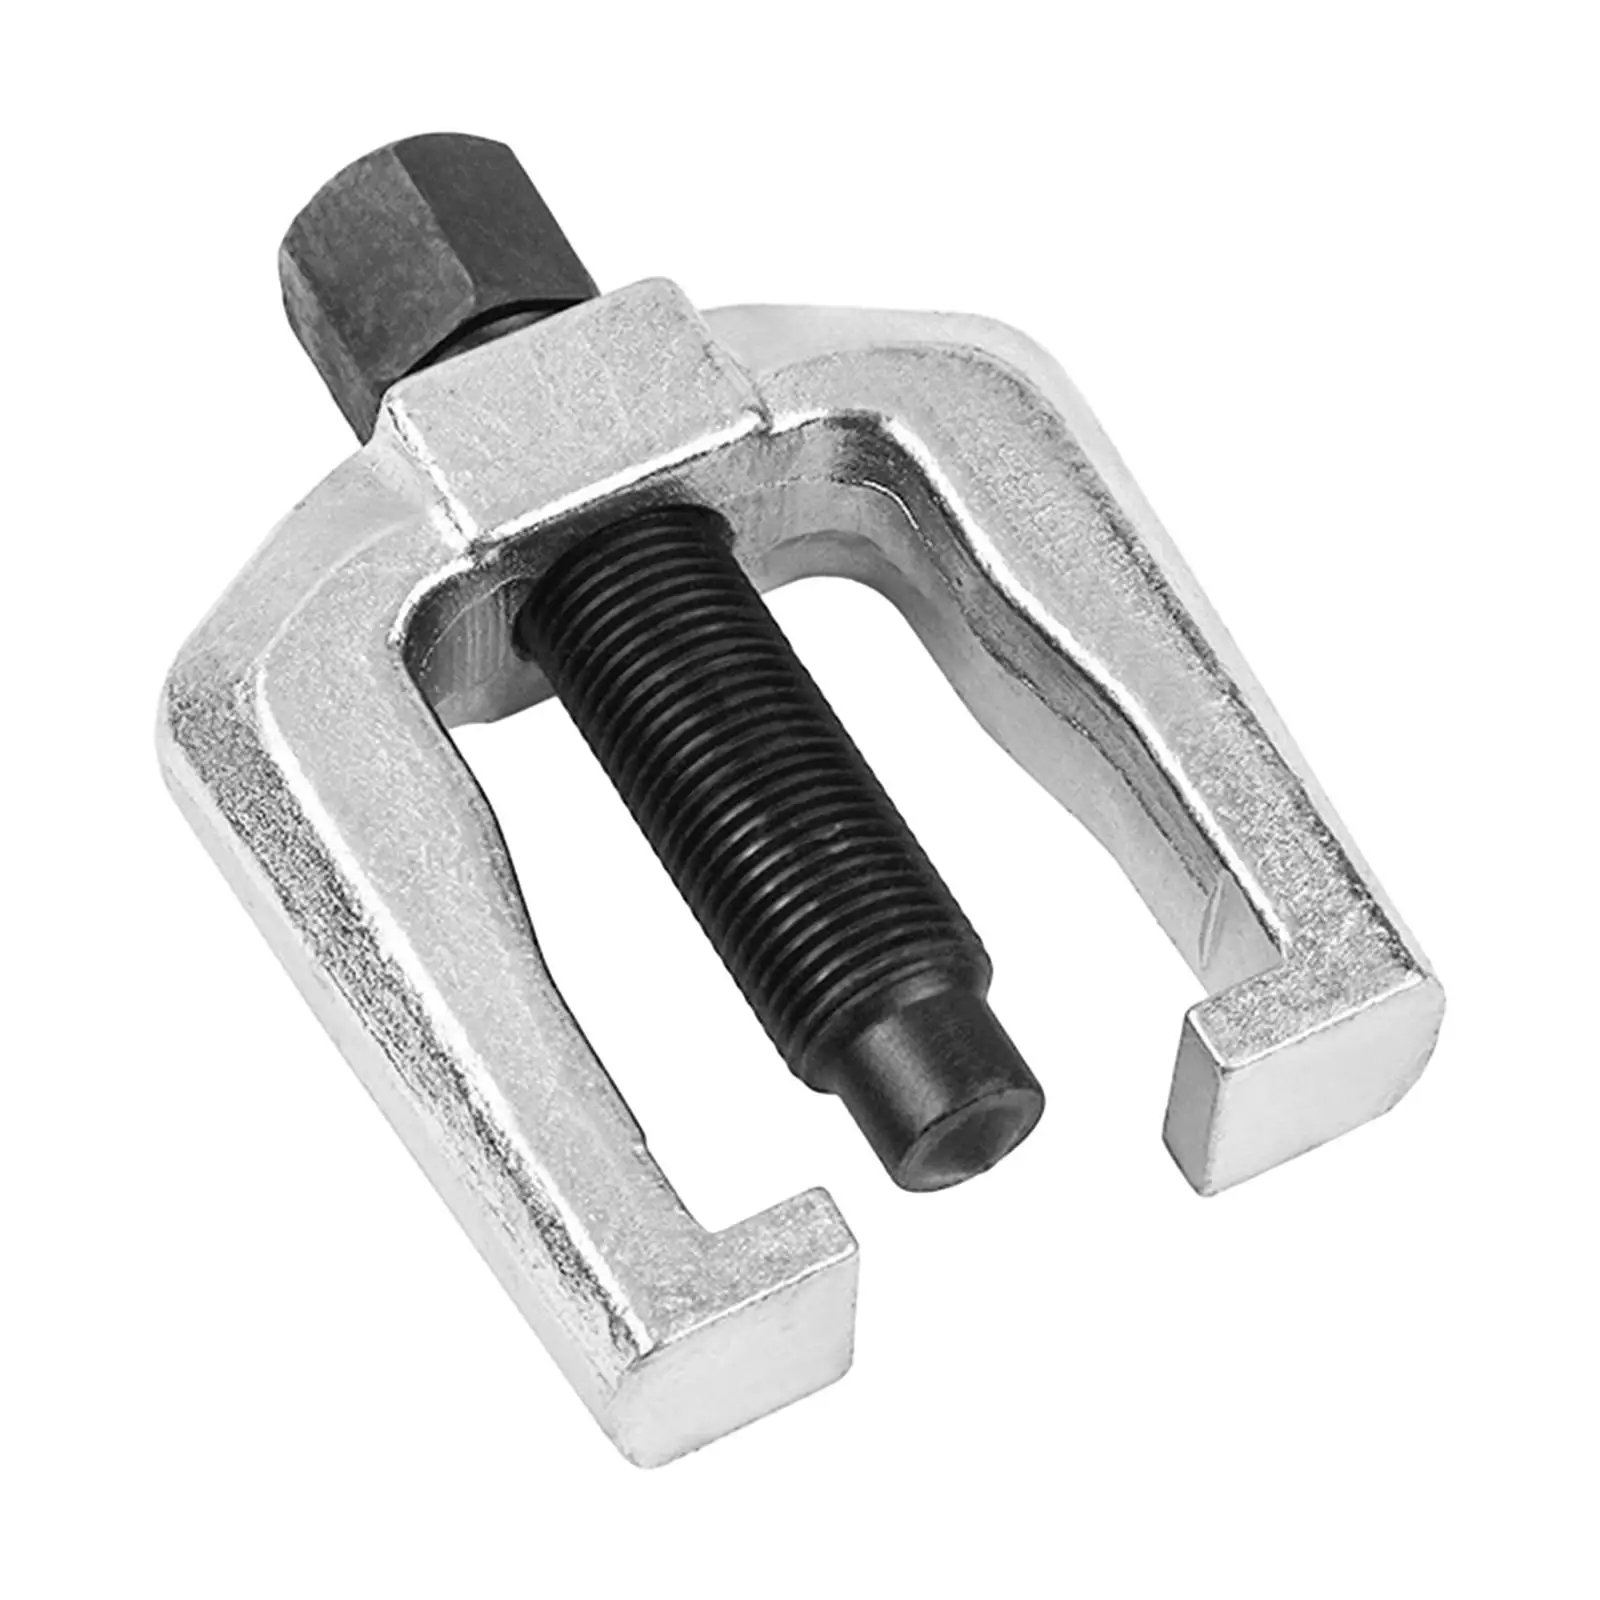 Slack Adjuster Puller High Performance Sturdy Remove Tool Easy to Operate Metal Repair Tool Removal Tool for Gears Remover Tool